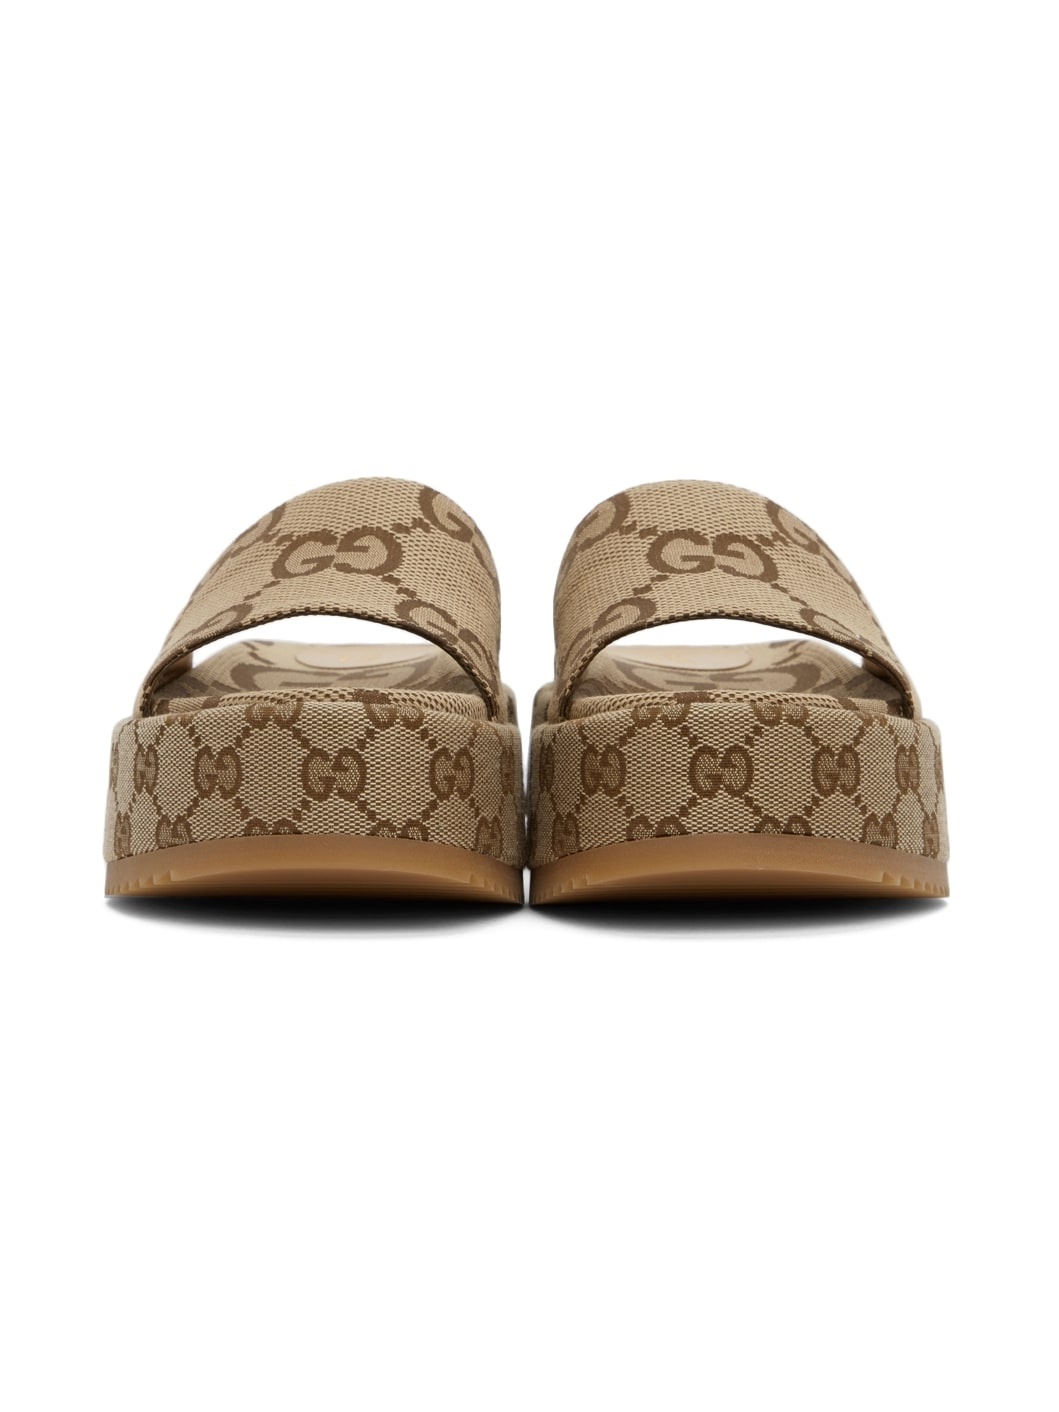 Brown GG Angelina Sandals - 2